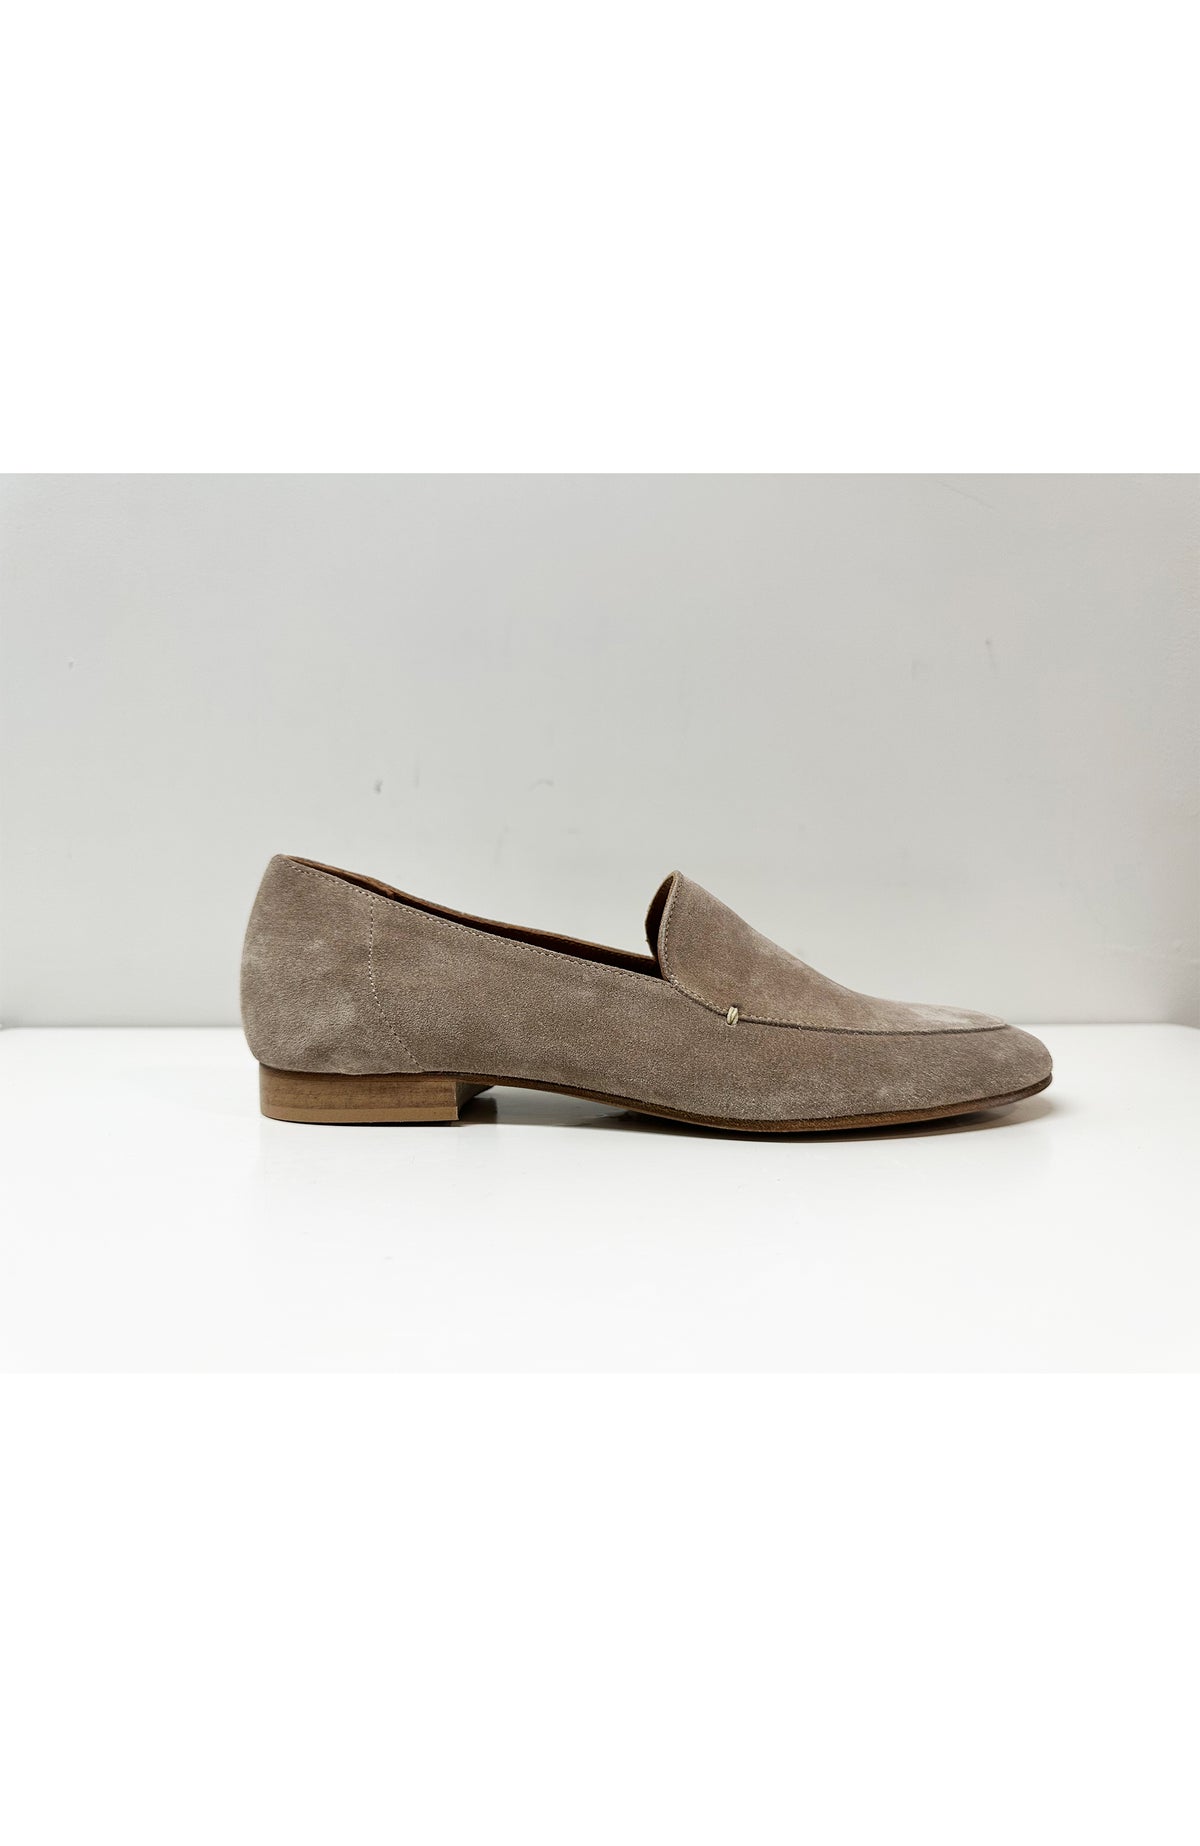 EMPORIO ITALIA LOAFER IN BISCUIT SUEDE | ESCAPE CLOTHING